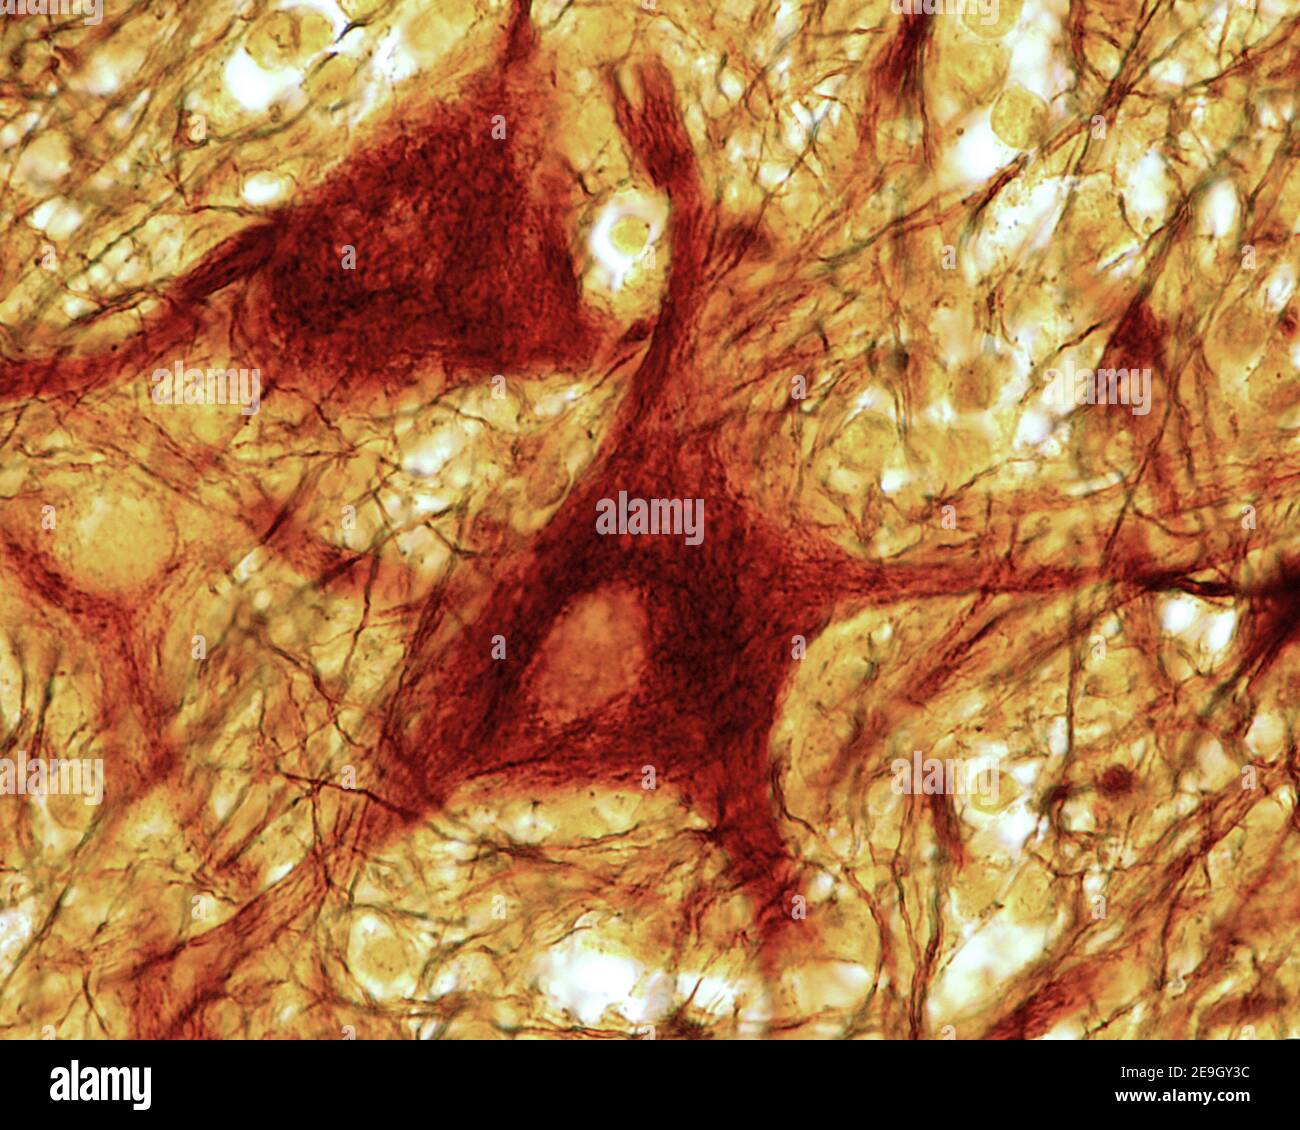 Multipolar neuron of the anterior horn of the spinal cord showing the meshwork of neurofibrils present in the soma and dendrites. Cajal's silver nitra Stock Photo